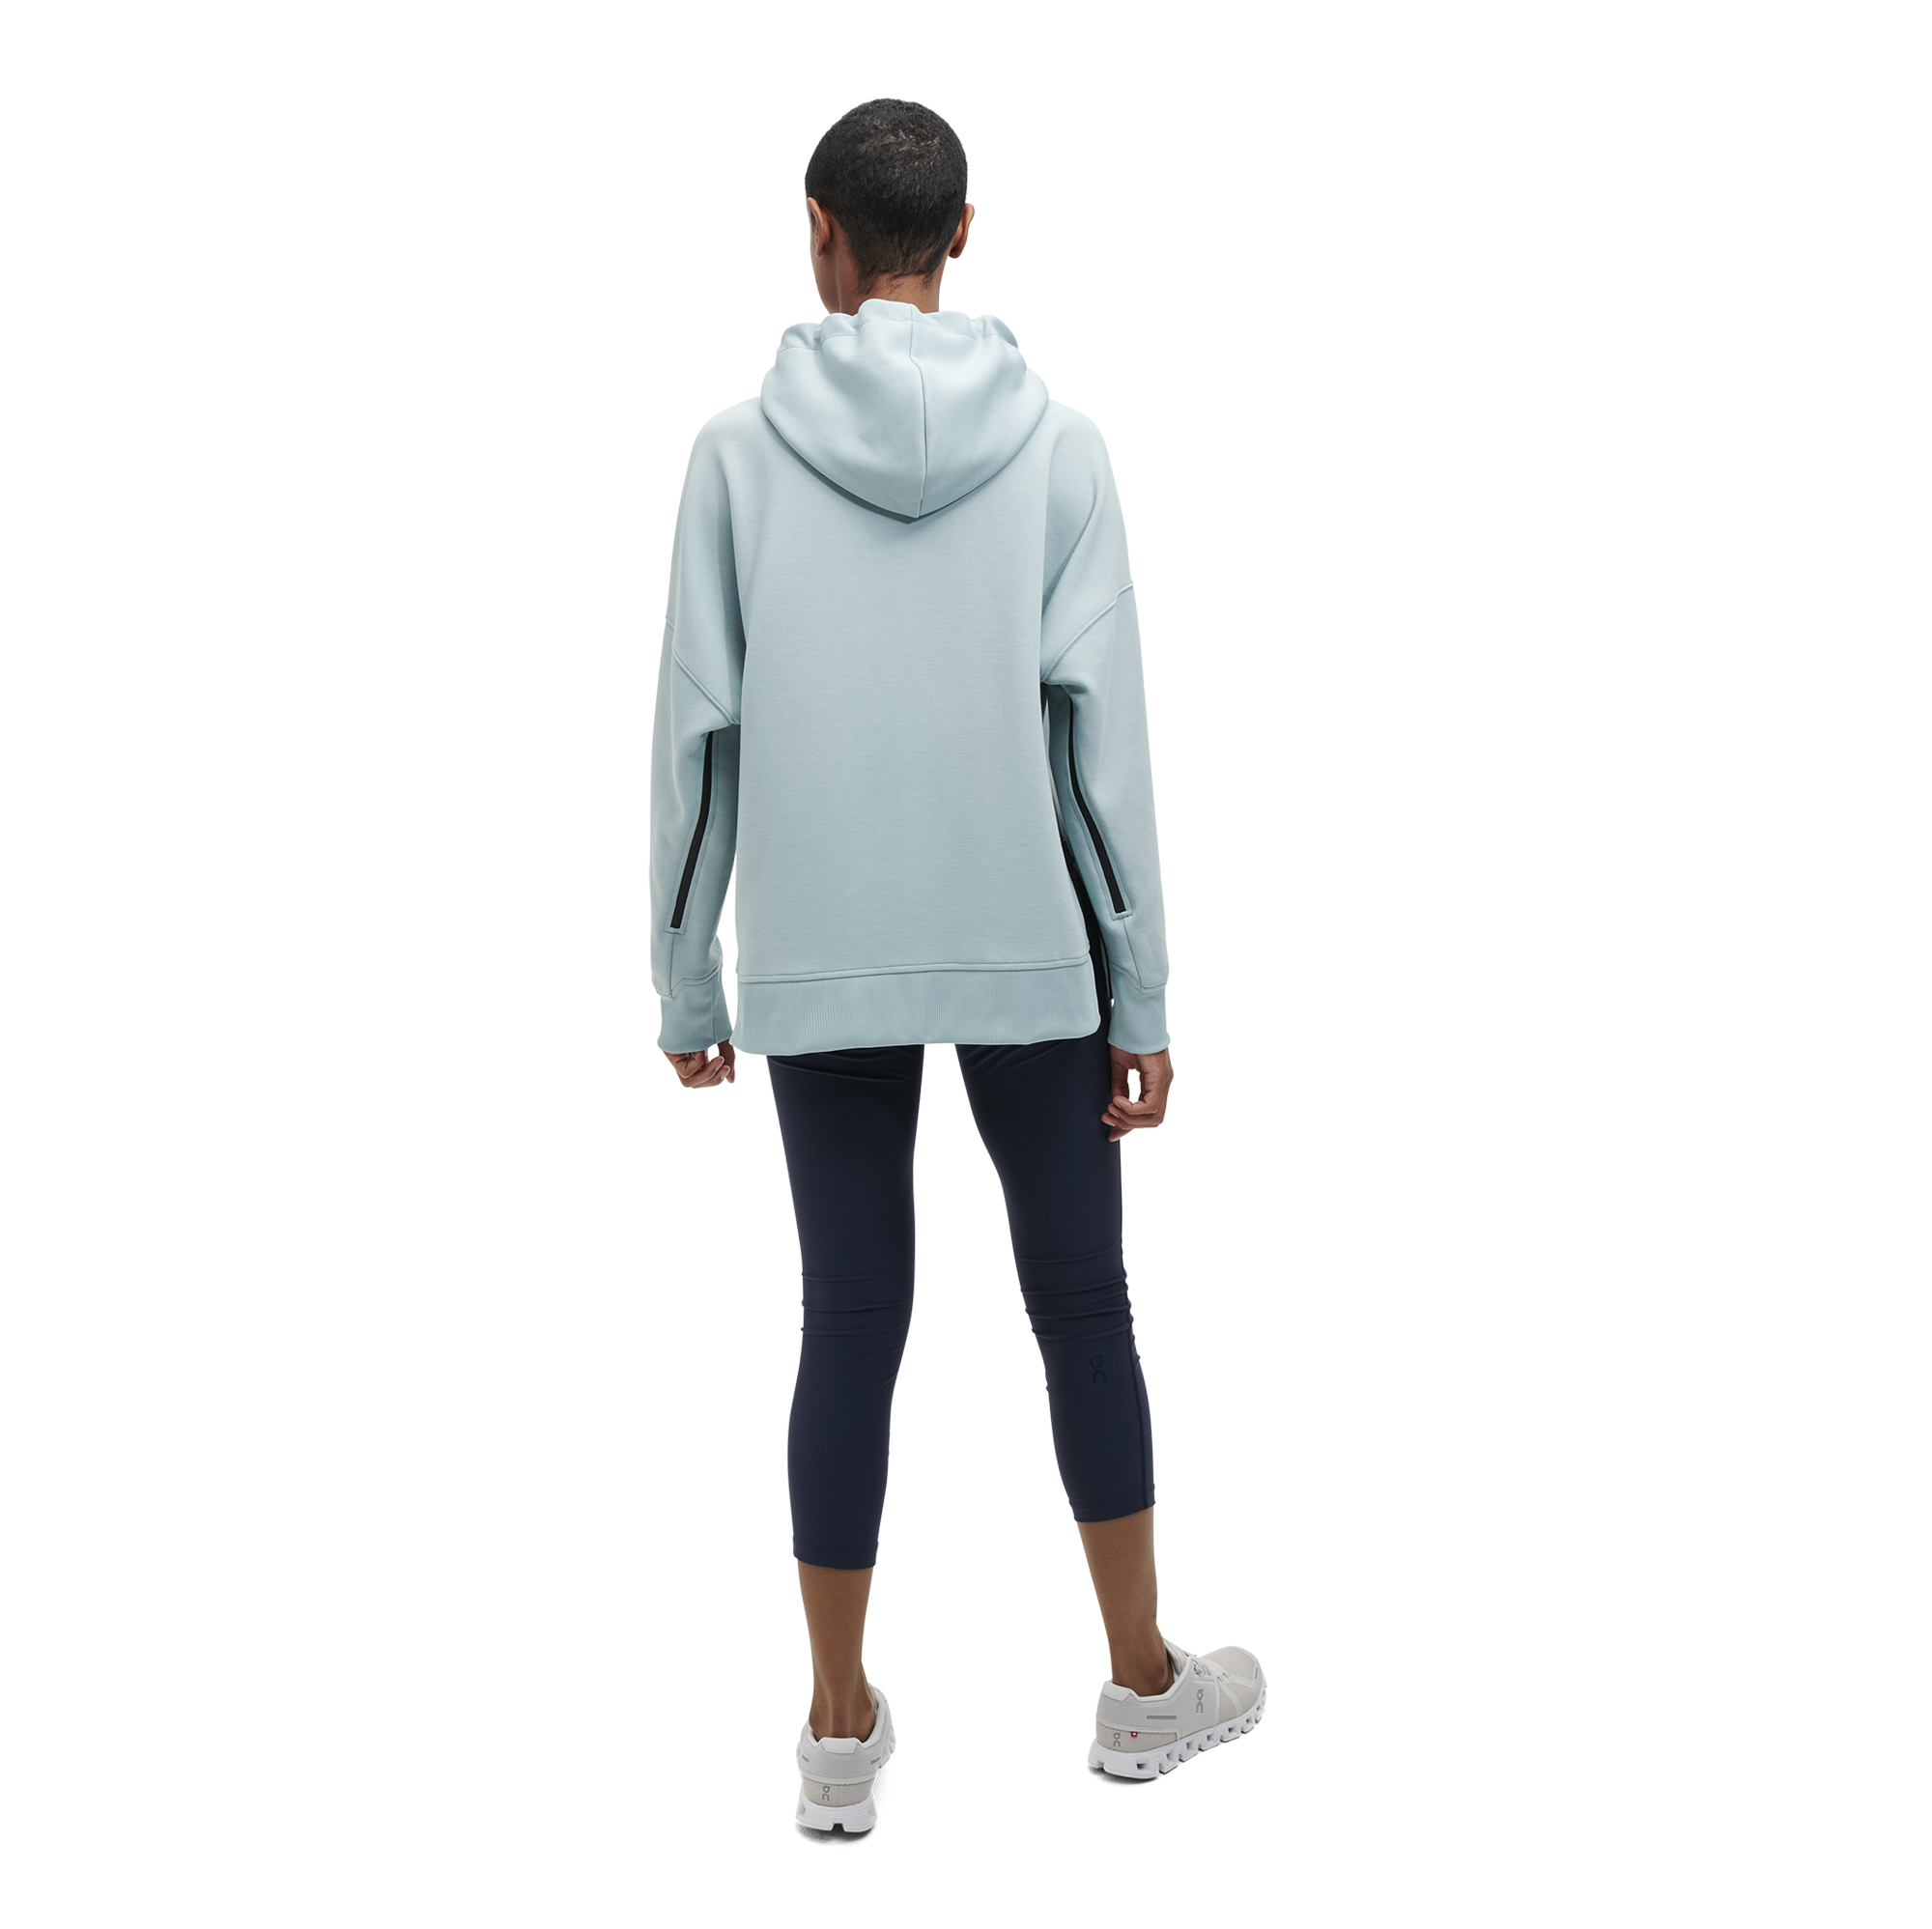 Women's Hoodies  Even&Odd Sweatshirt – white/brown/pink/white – CN38093 -  Fashion-Forward Footwear and Apparel for Every Occasion!